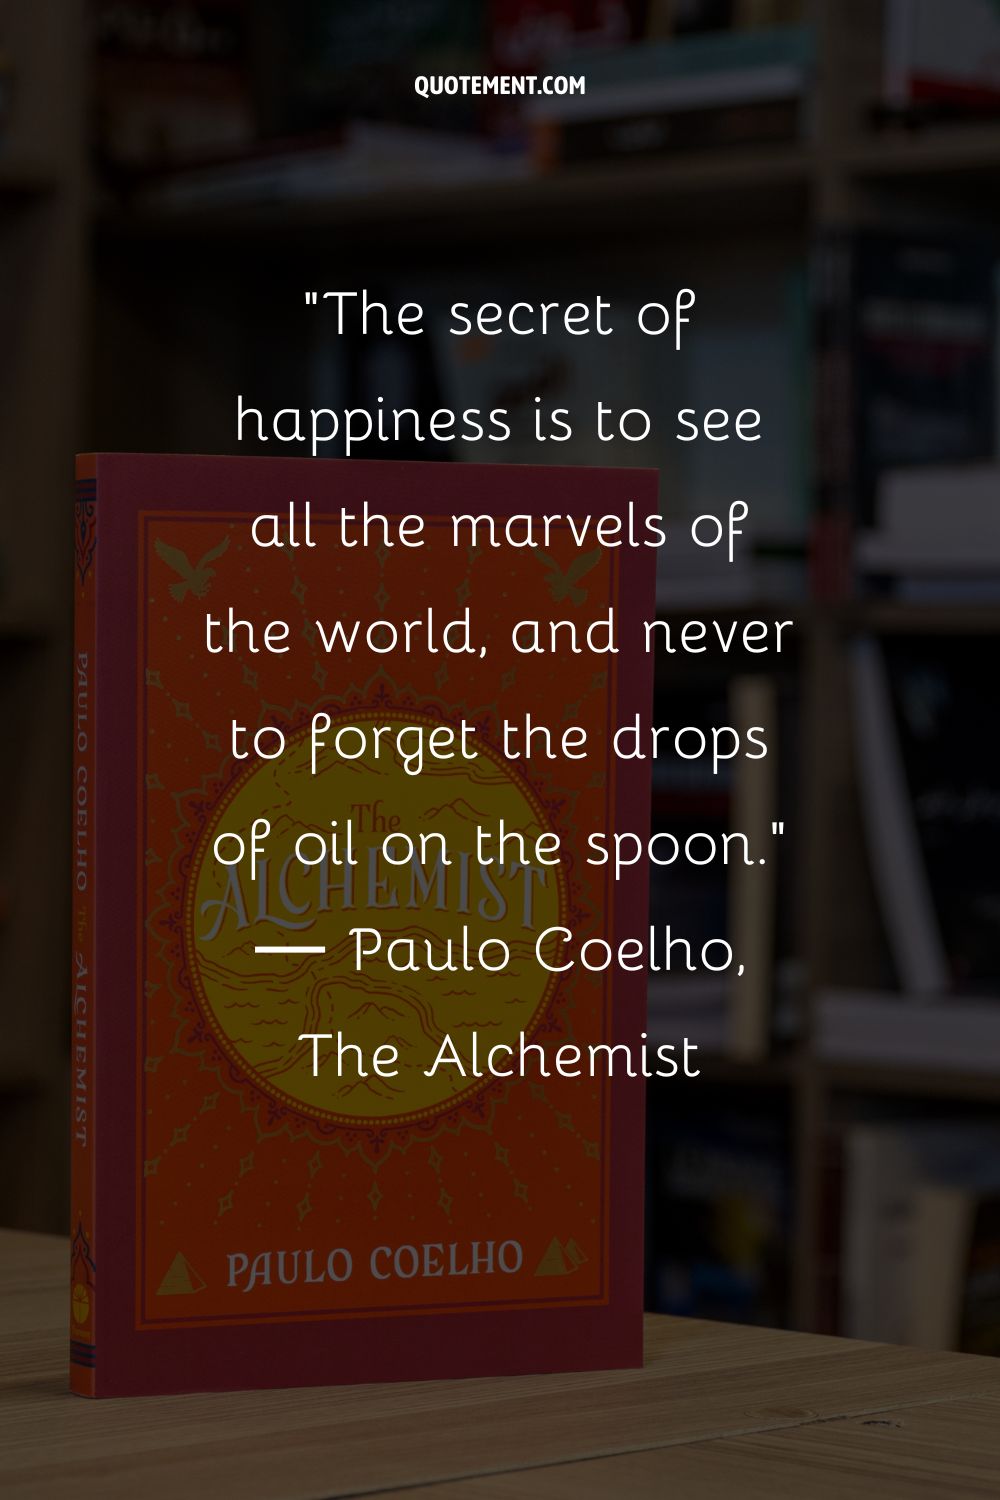 The secret of happiness is to see all the marvels of the world, and never to forget the drops of oil on the spoon